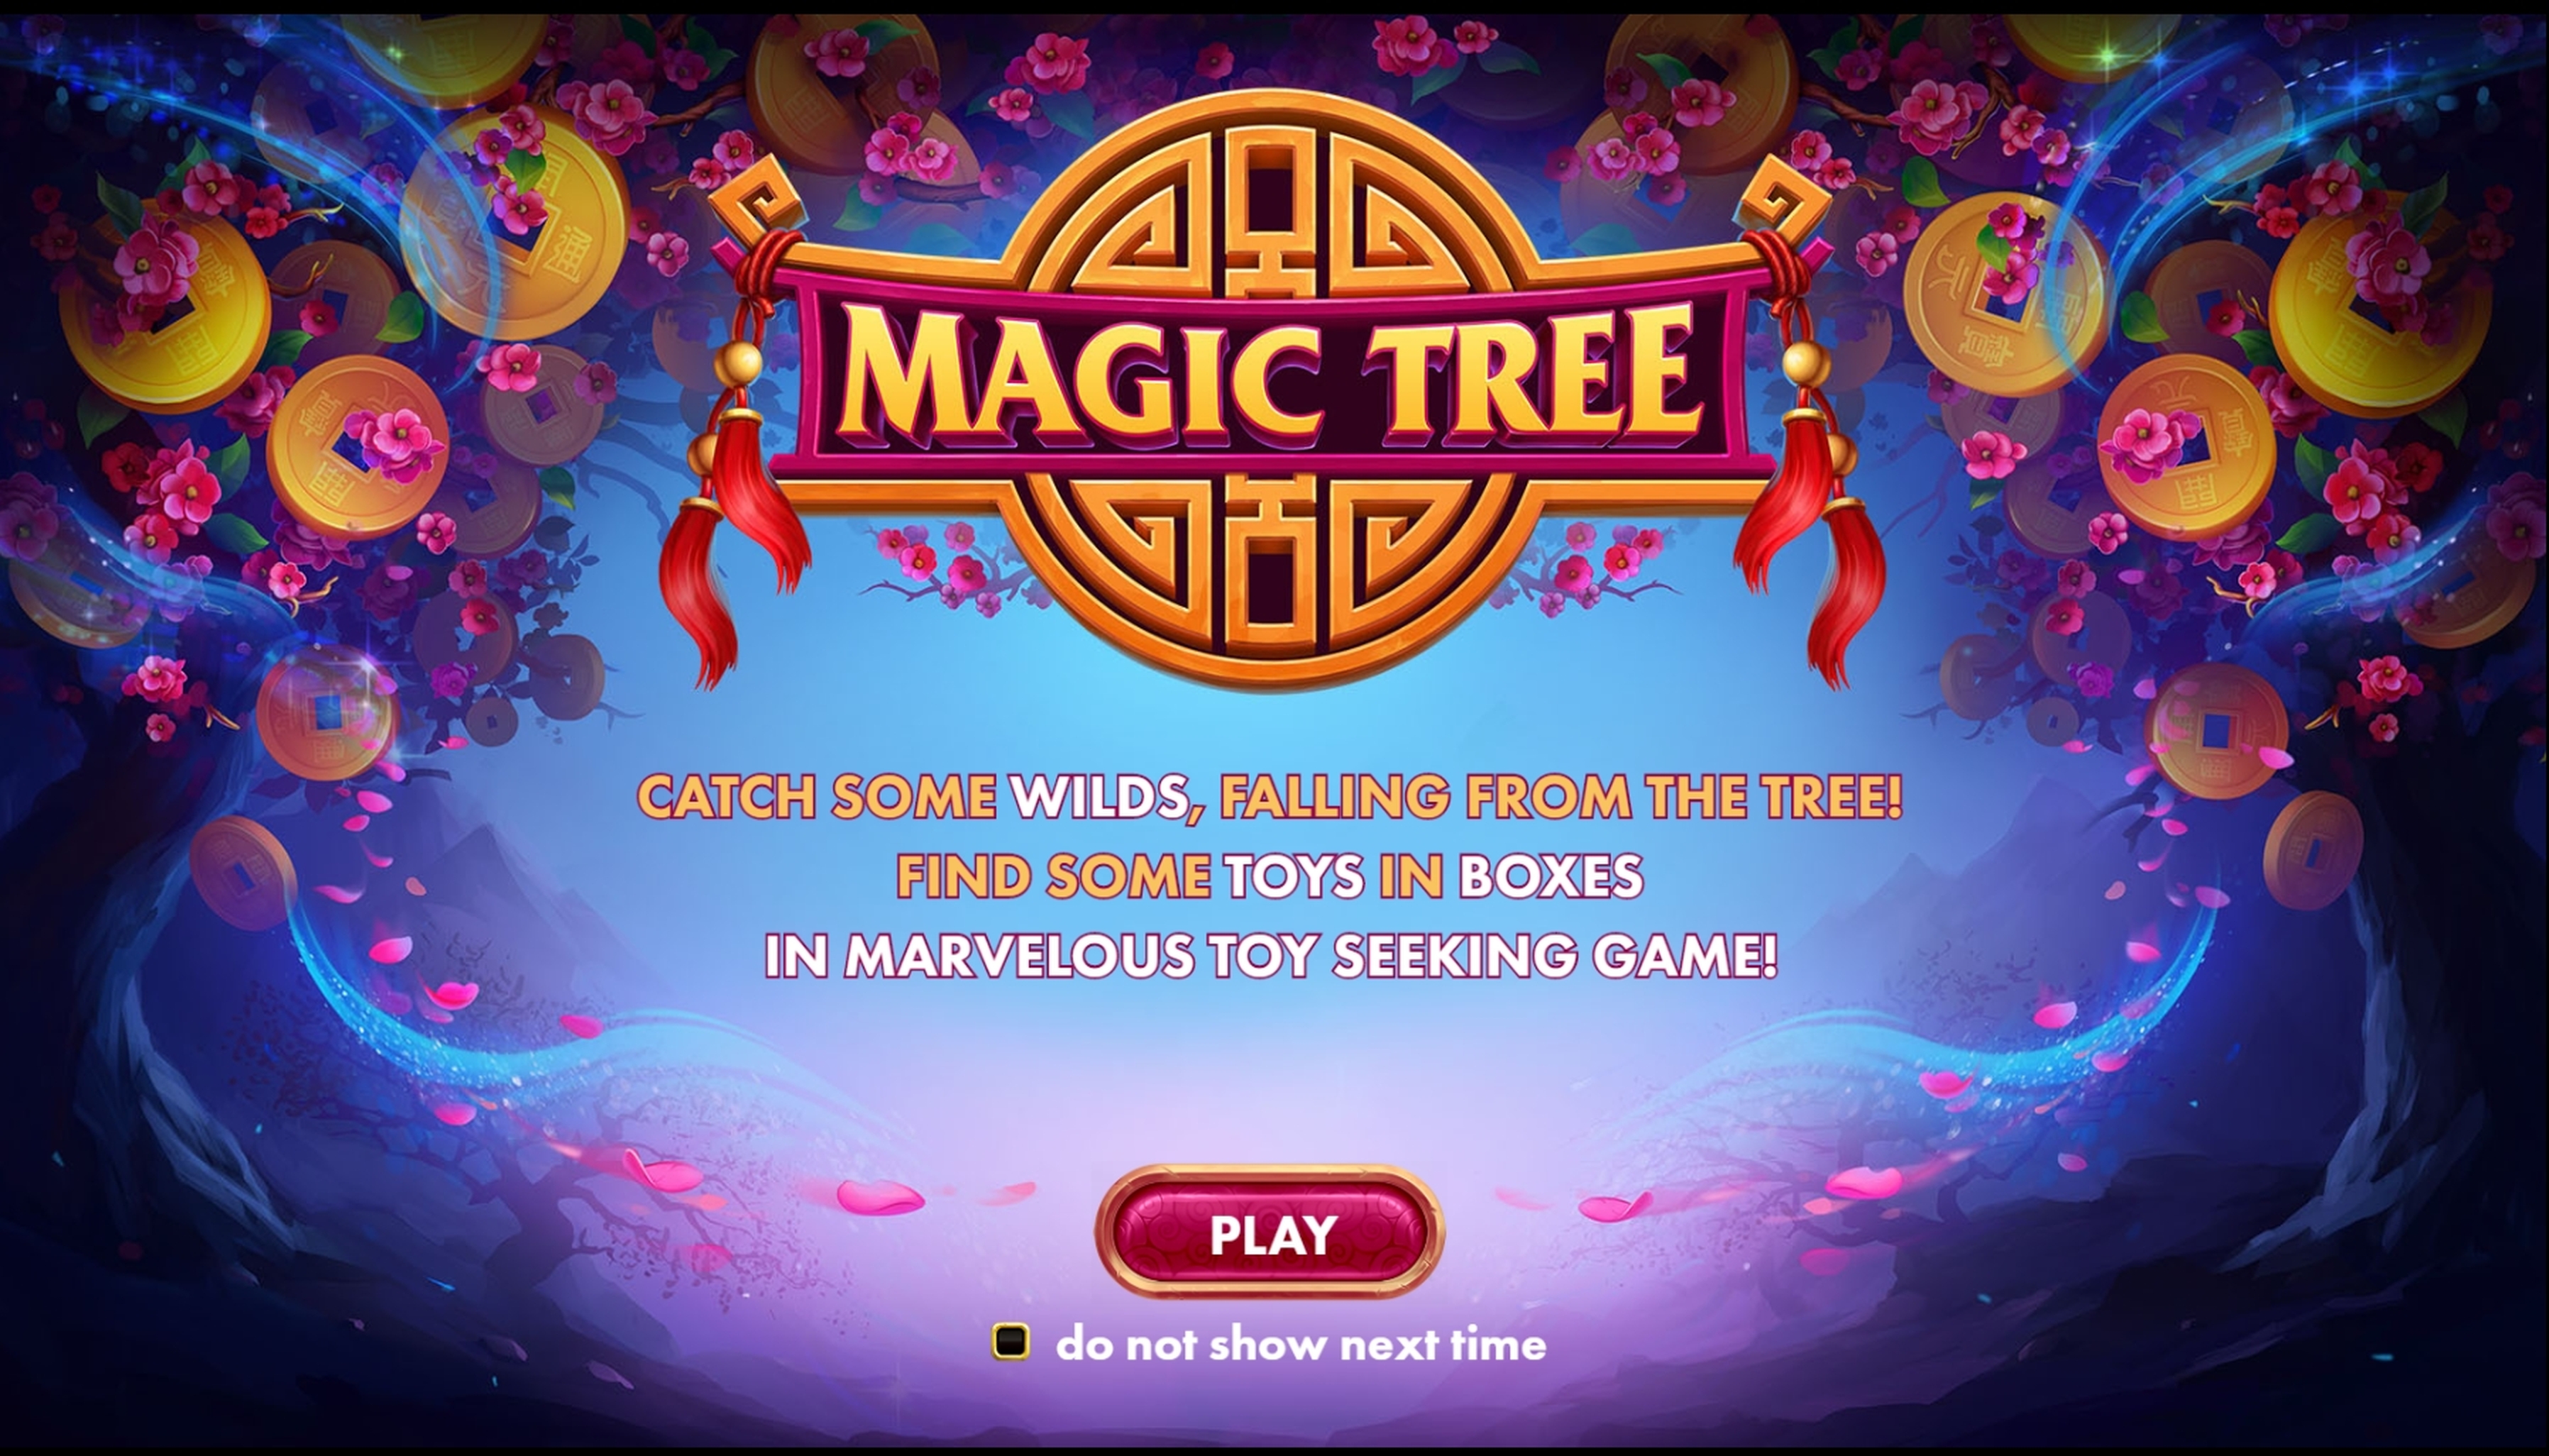 Play Magic Tree Free Casino Slot Game by Reel Time Gaming